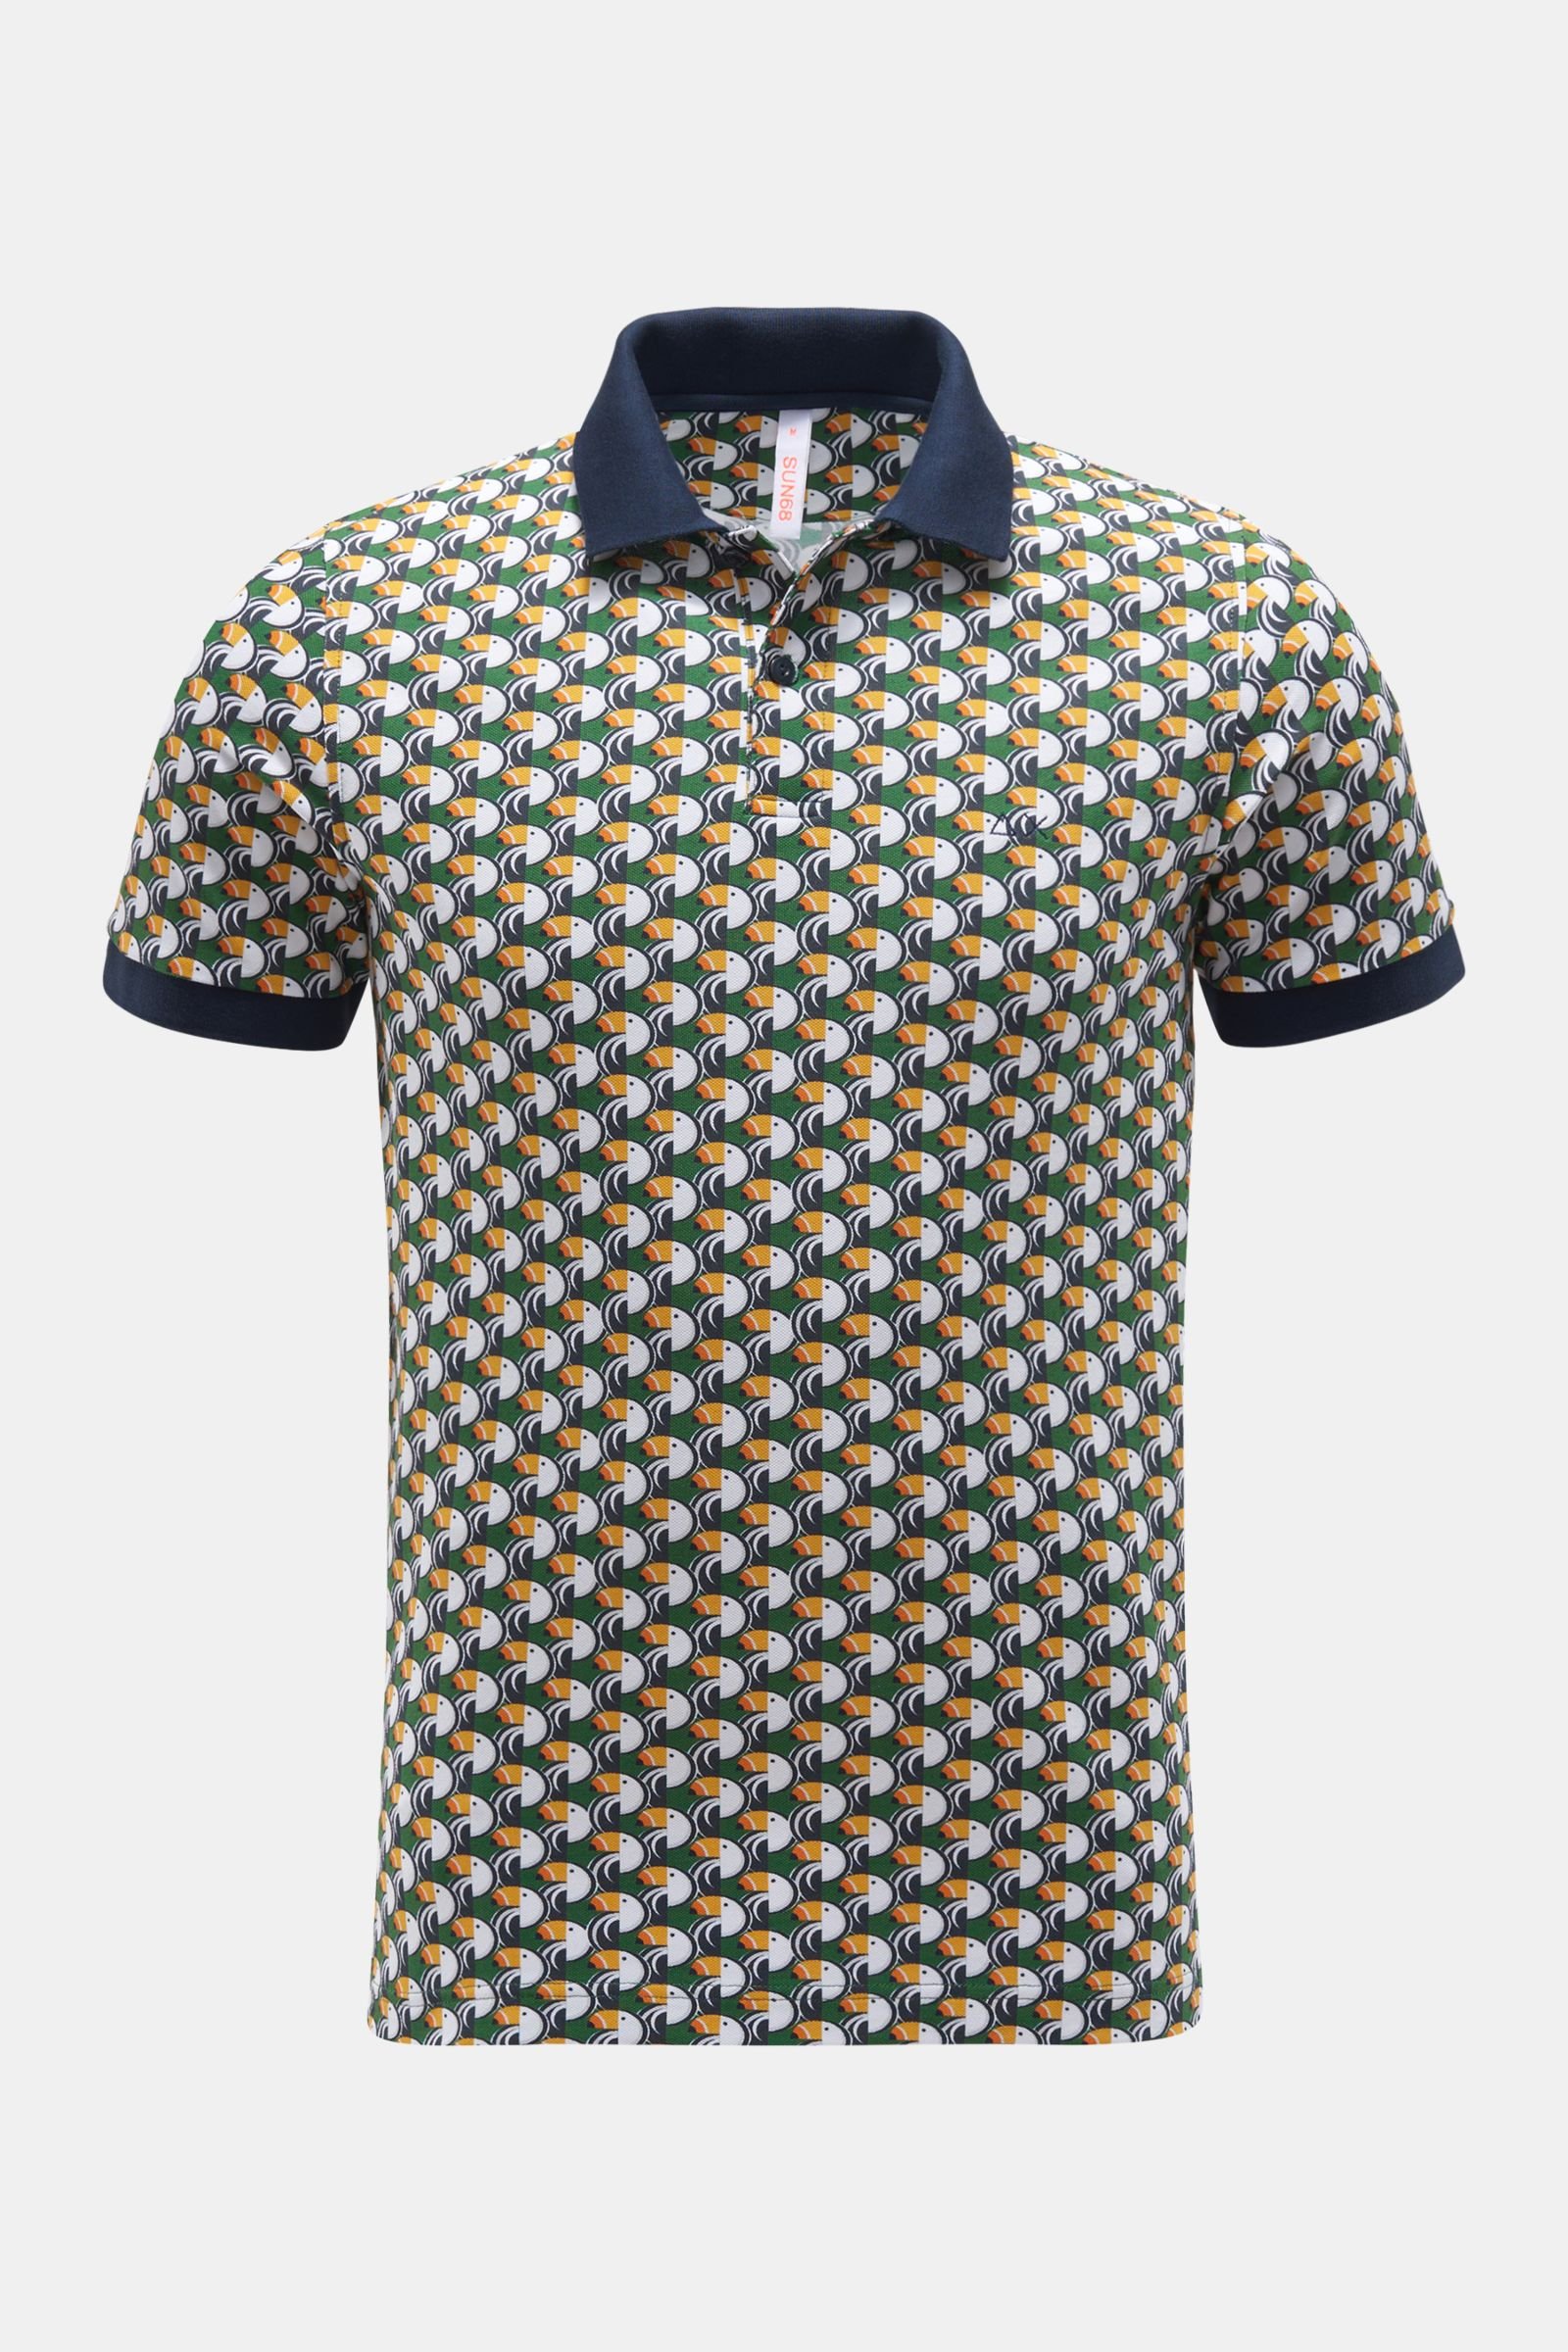 Polo shirt green/yellow patterned